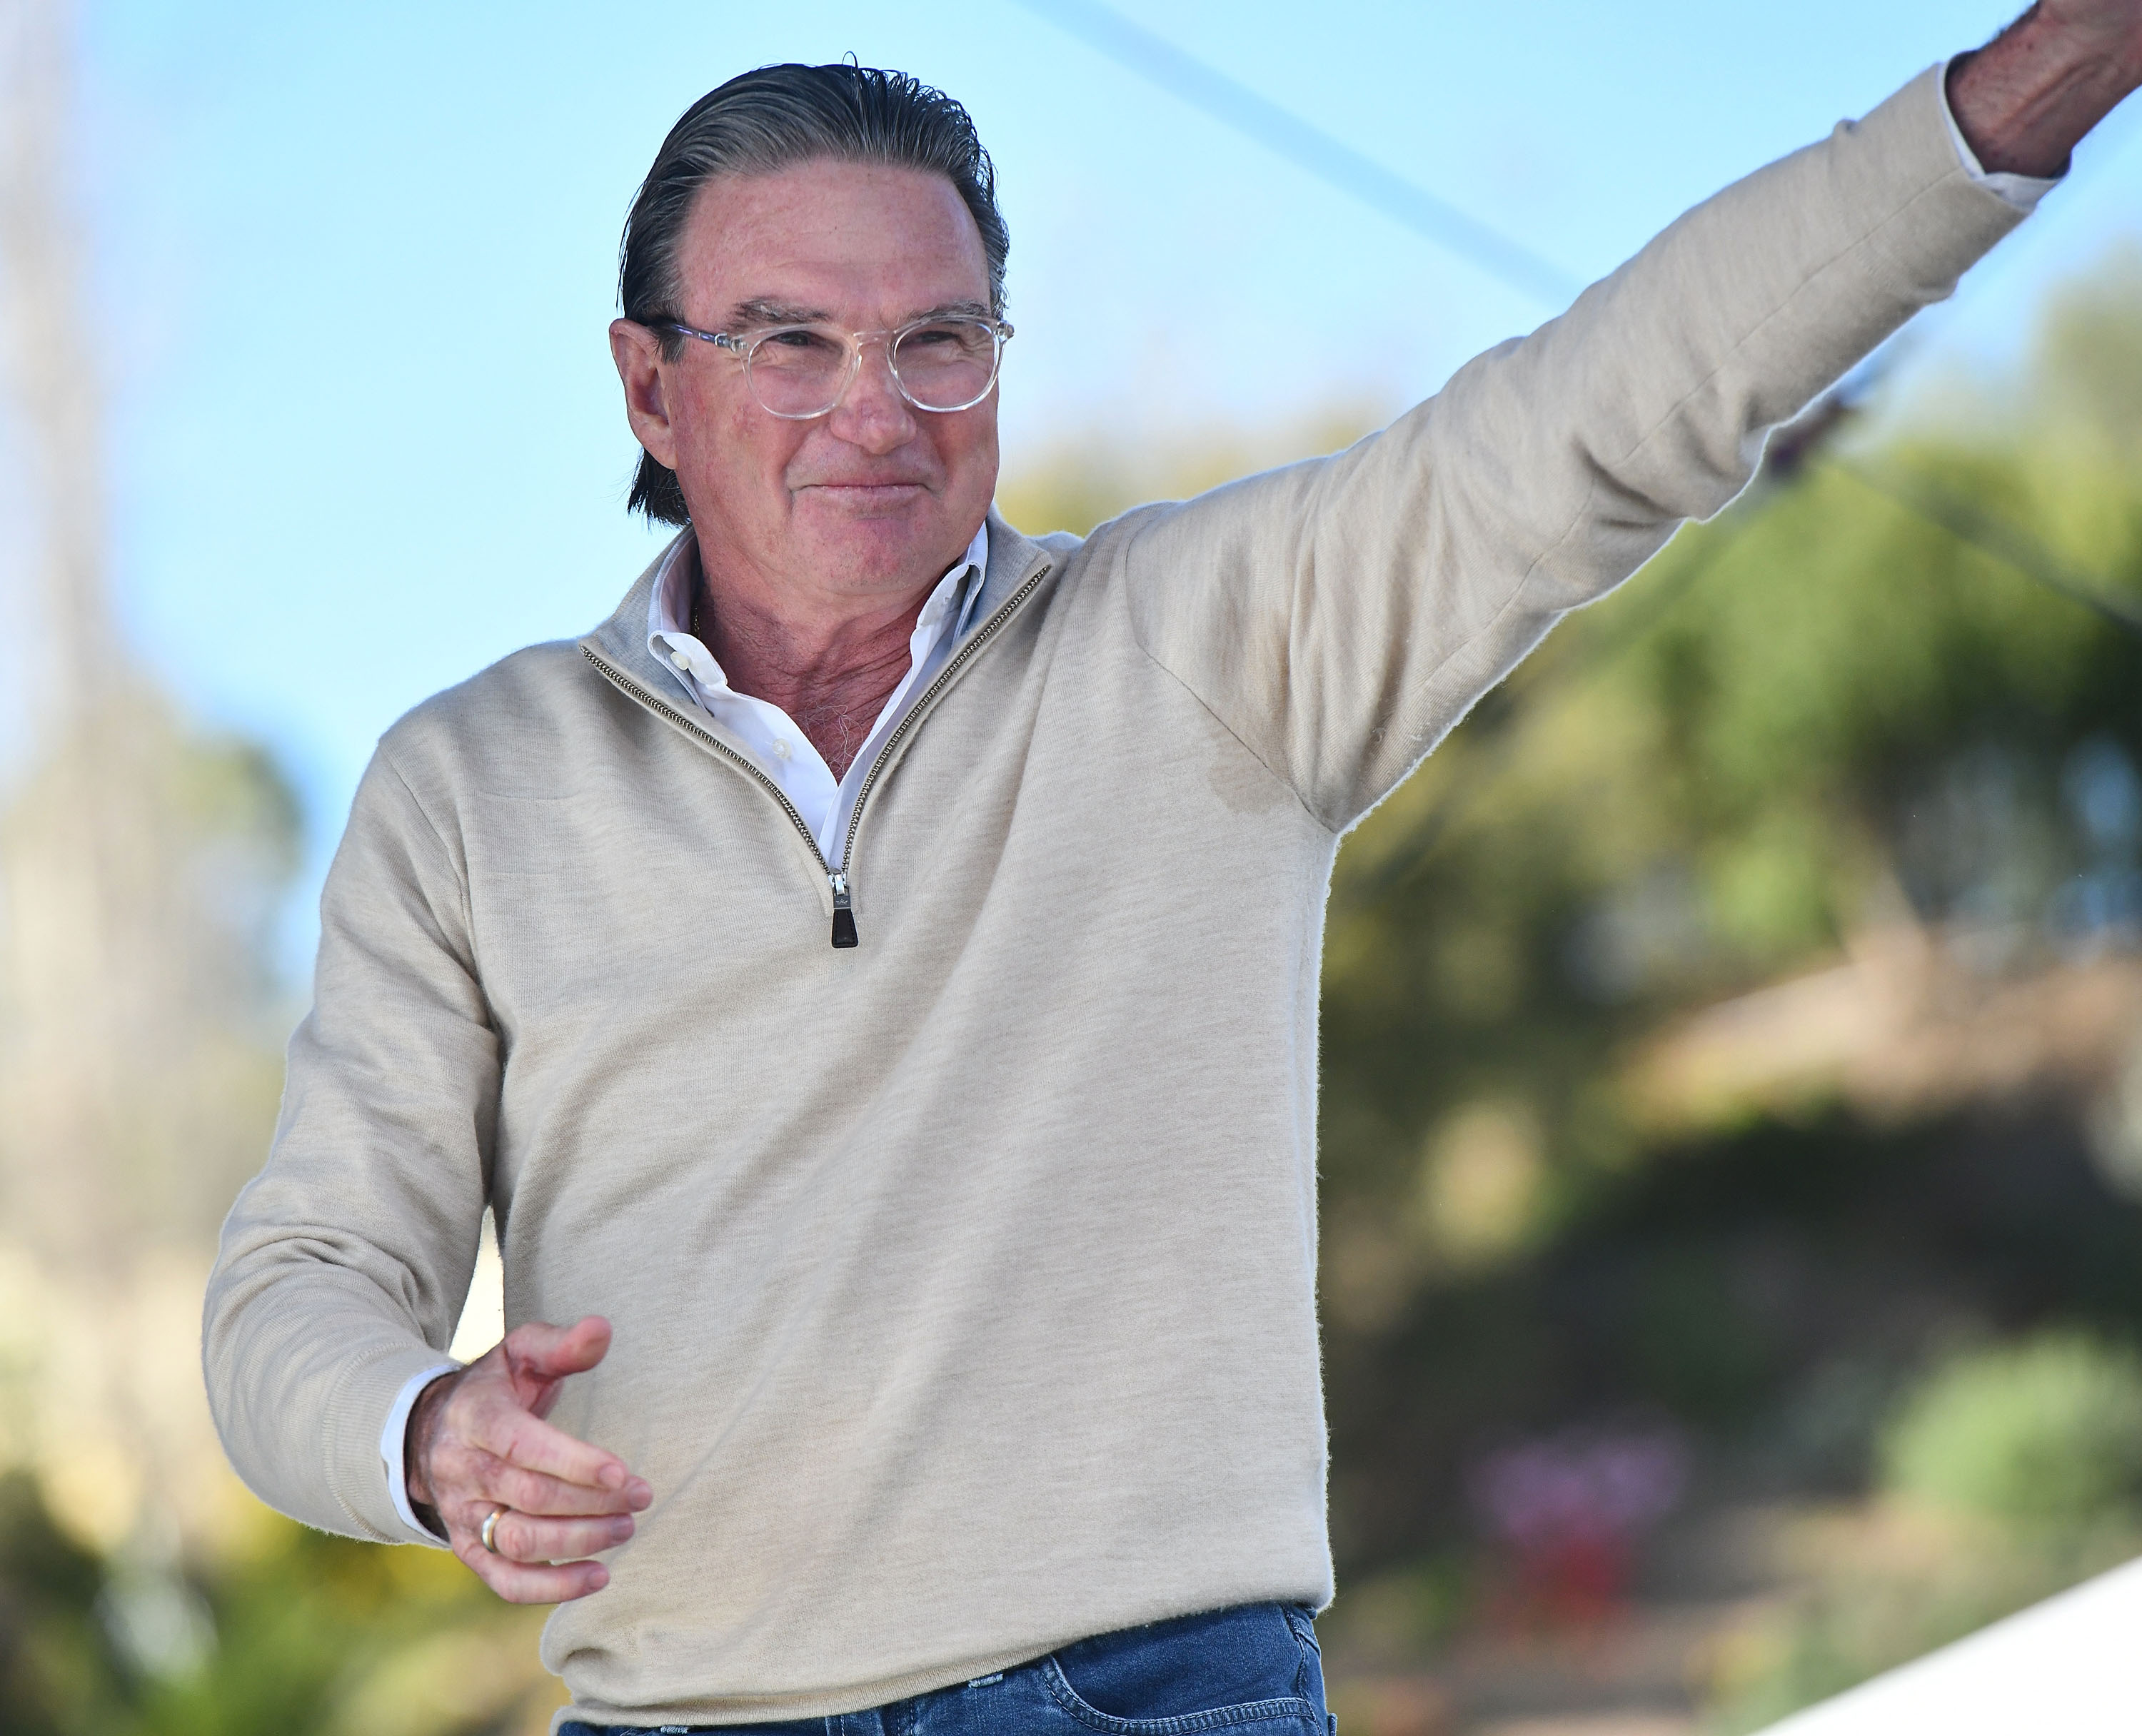 Where is tennis legend Jimmy Connors now and what is his net worth?